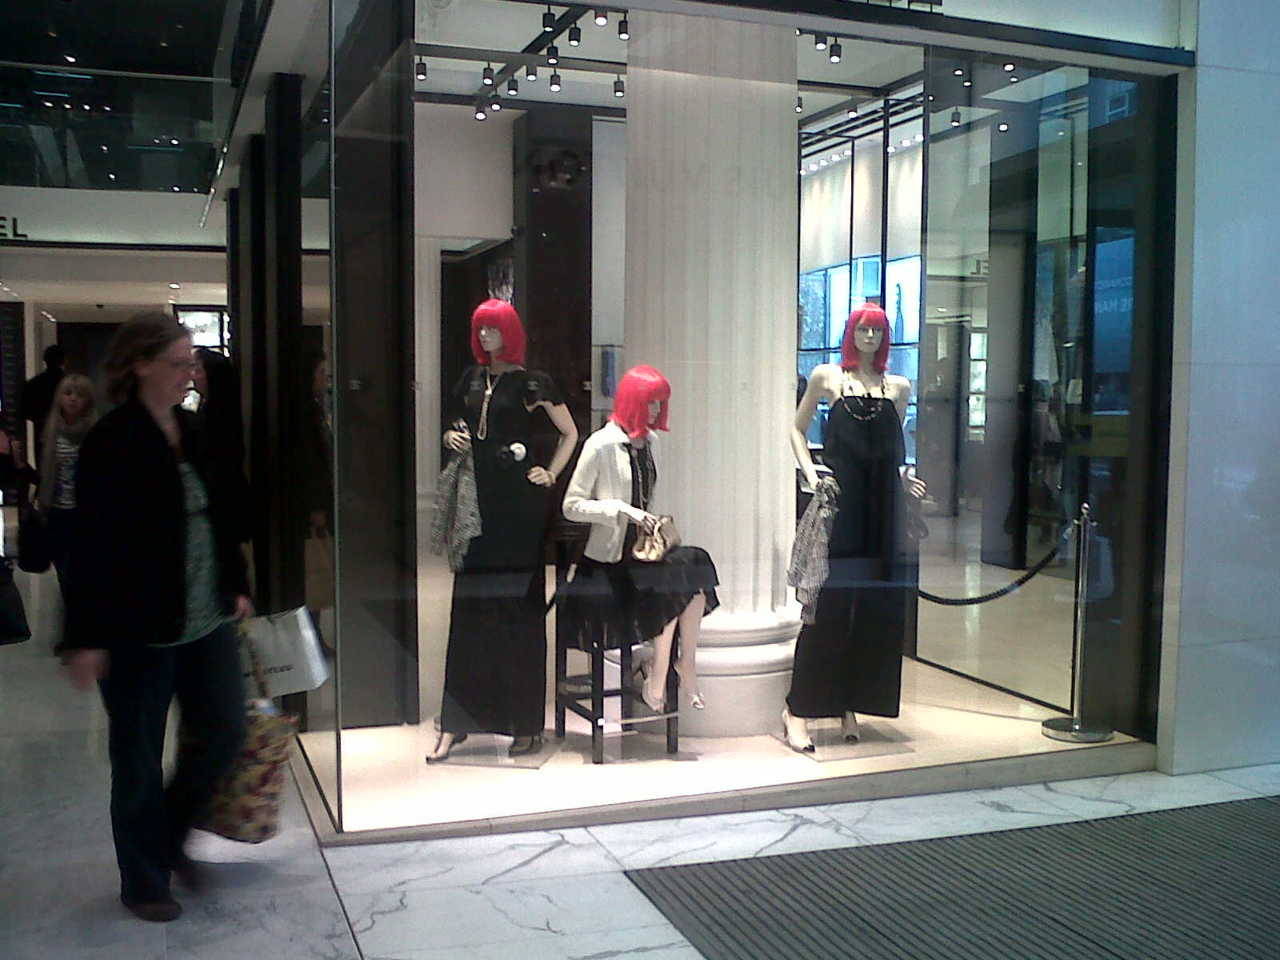 Rihanna was the first person I thought of while I was at Selfridges, London outside Chanel on Wednesday lol